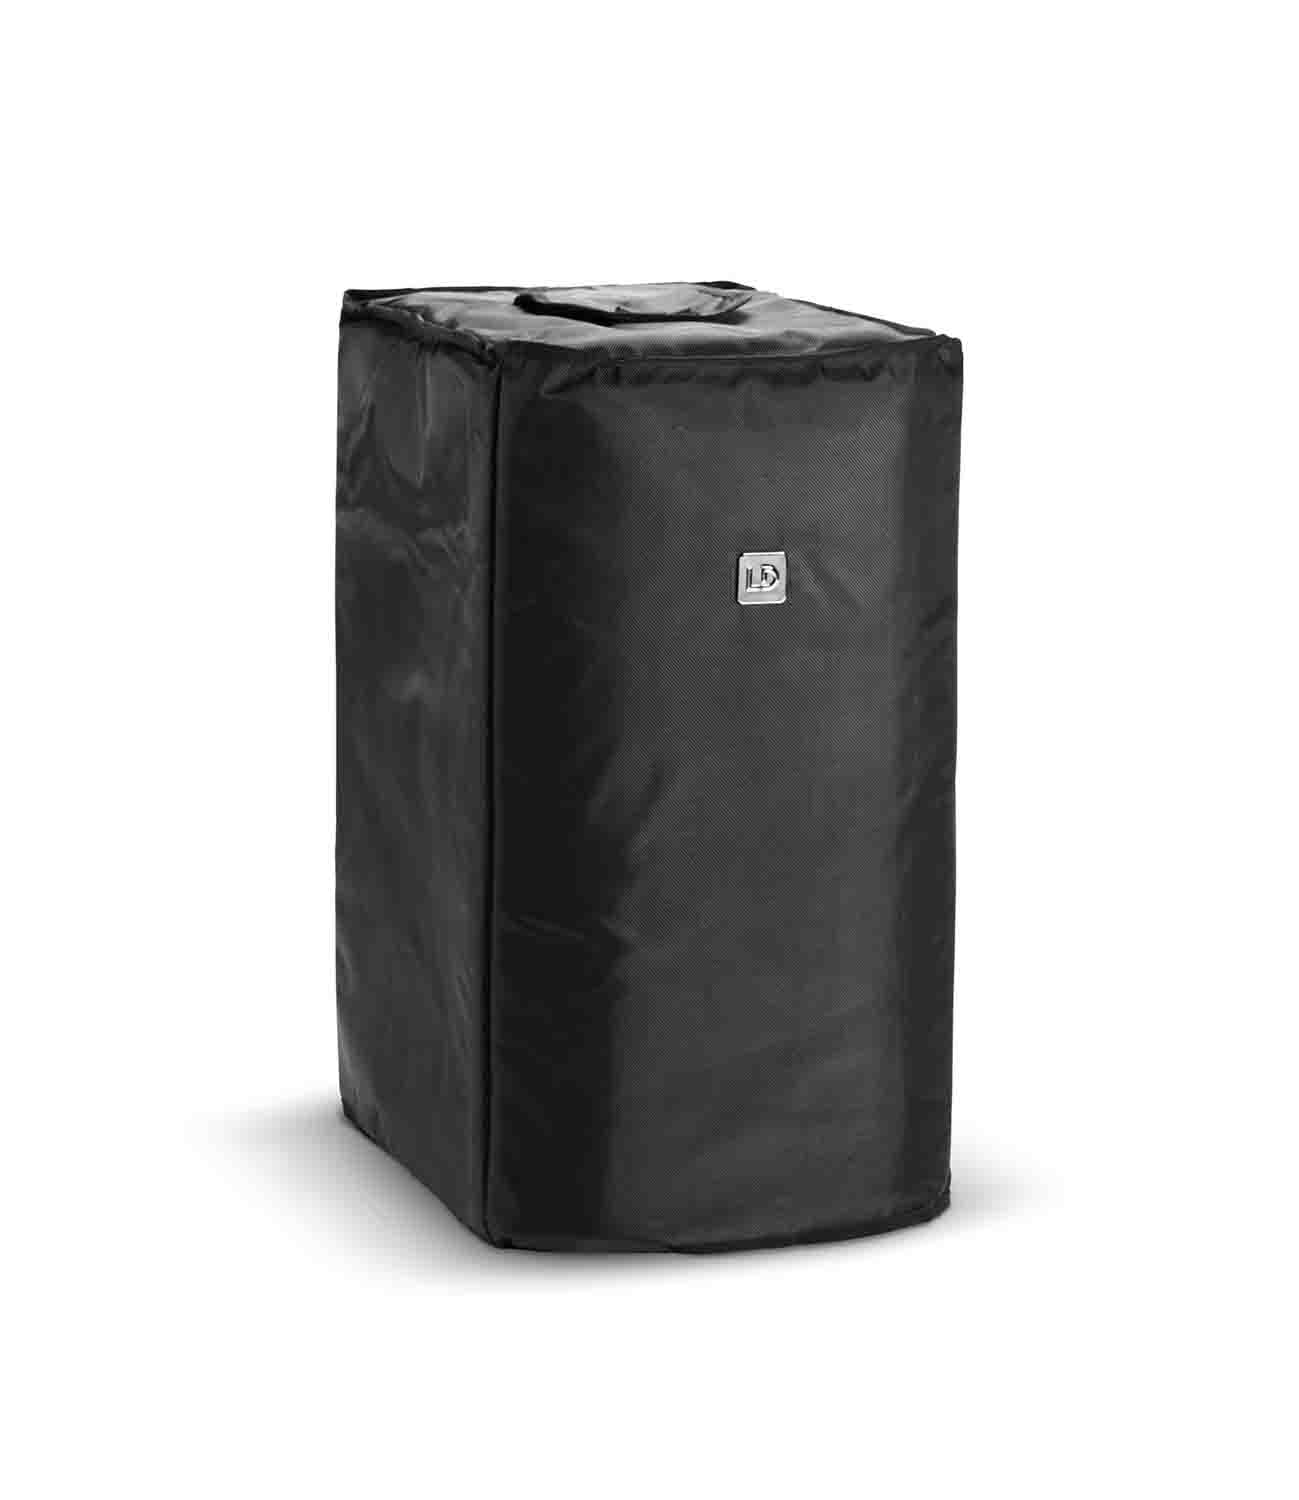 LD System MAUI 11 G3 SUB PC, Padded Protective Cover for MAUI 11 G3 Subwoofer - Hollywood DJ